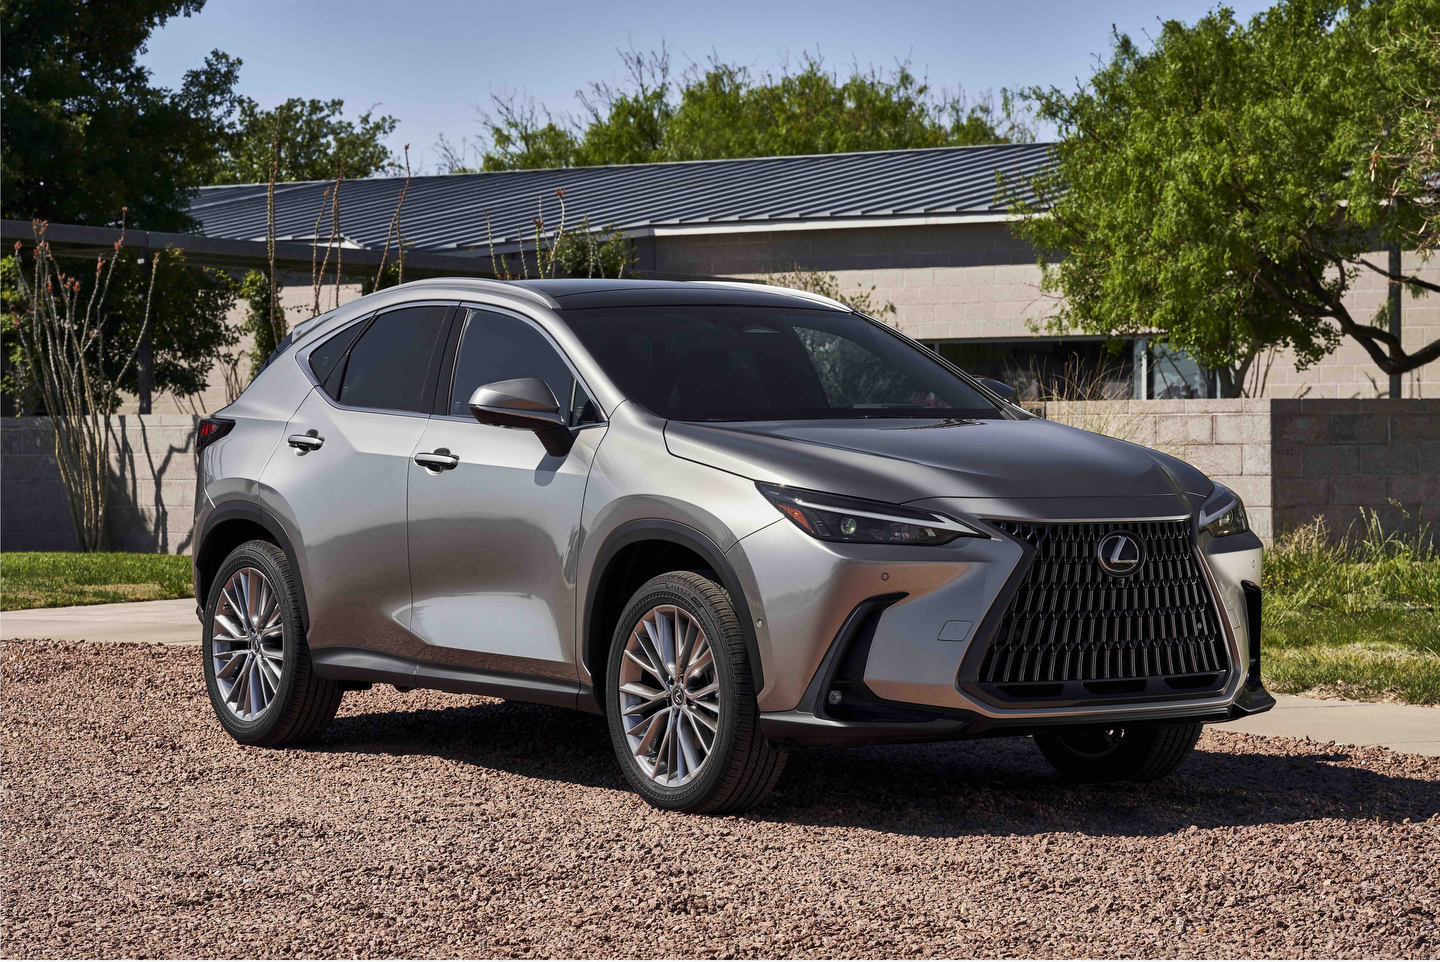 Key differences between the 2022 Lexus NX 350h and 2022 Lexus RX 450h